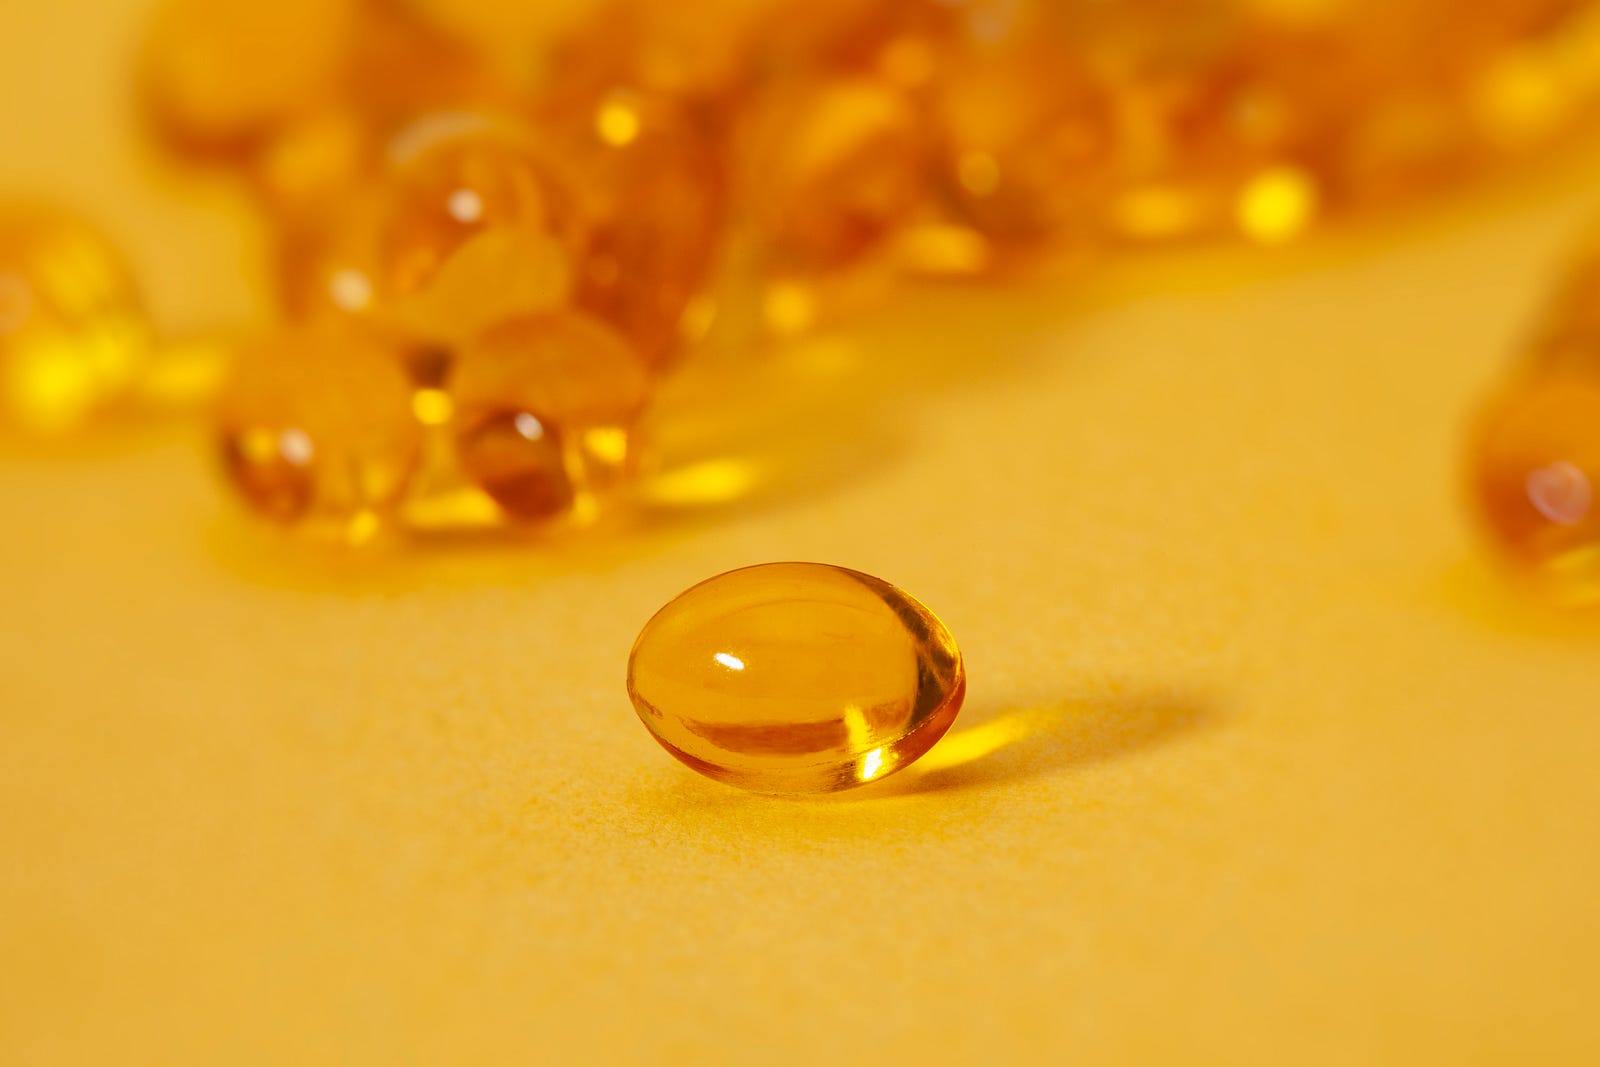 Several yellow vitamin D capsules in close-up. Vitamin D deficiency is associated with muscle loss.